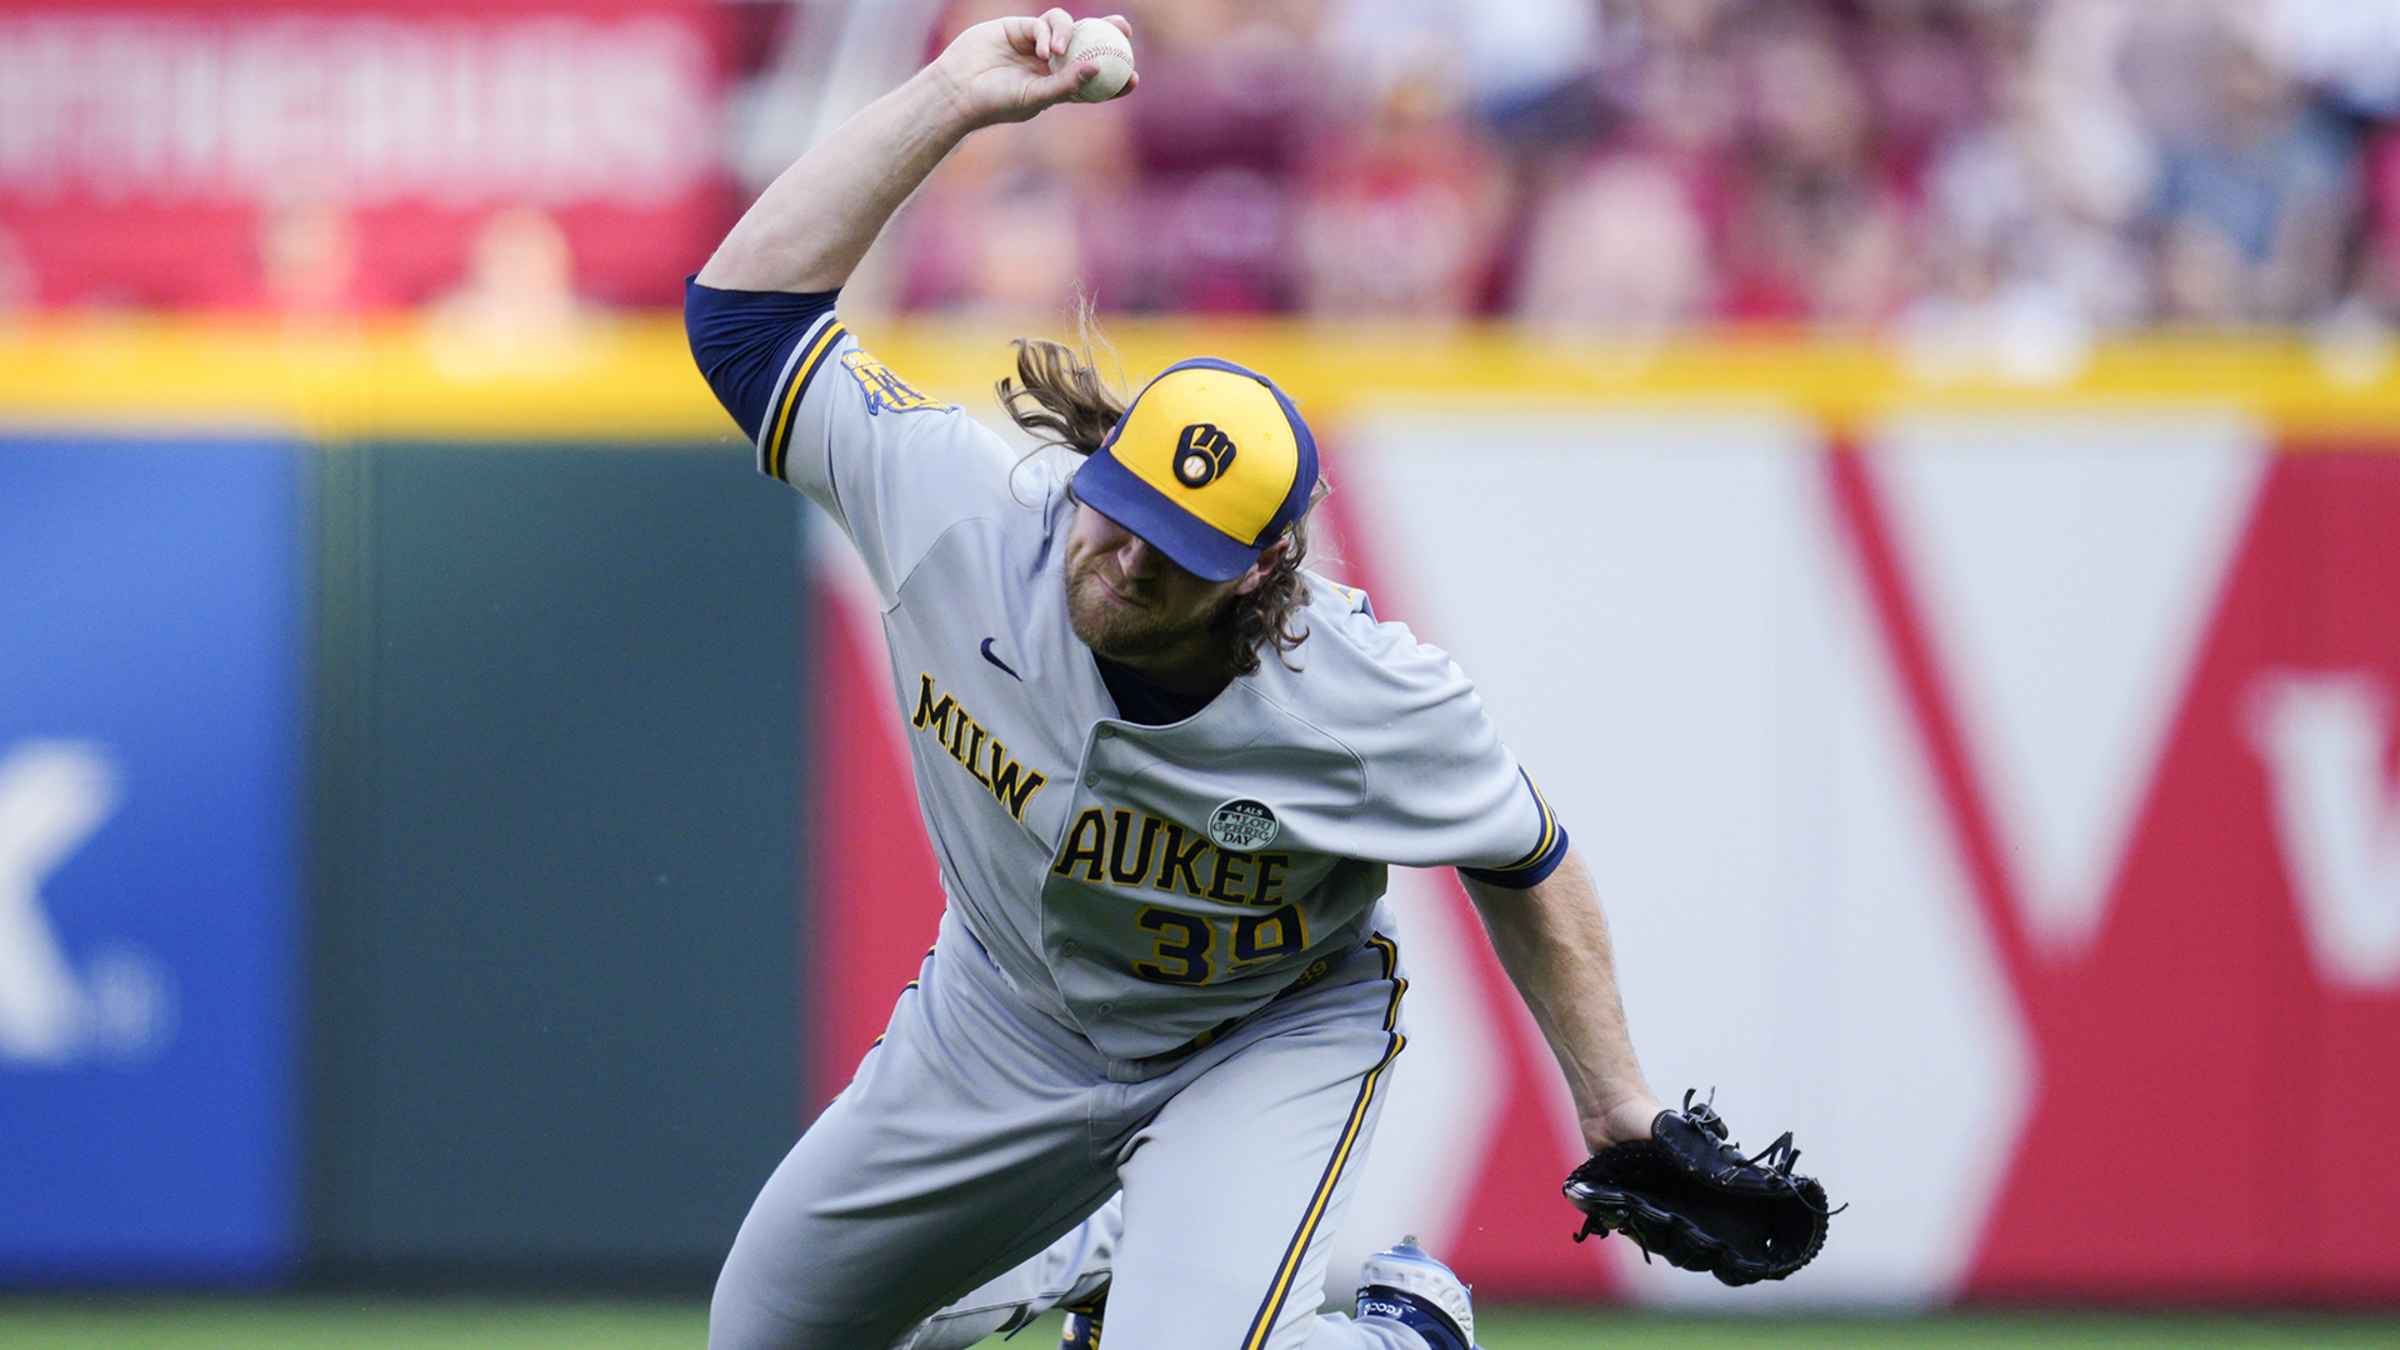 Which Reds players have also played for the Brewers? MLB